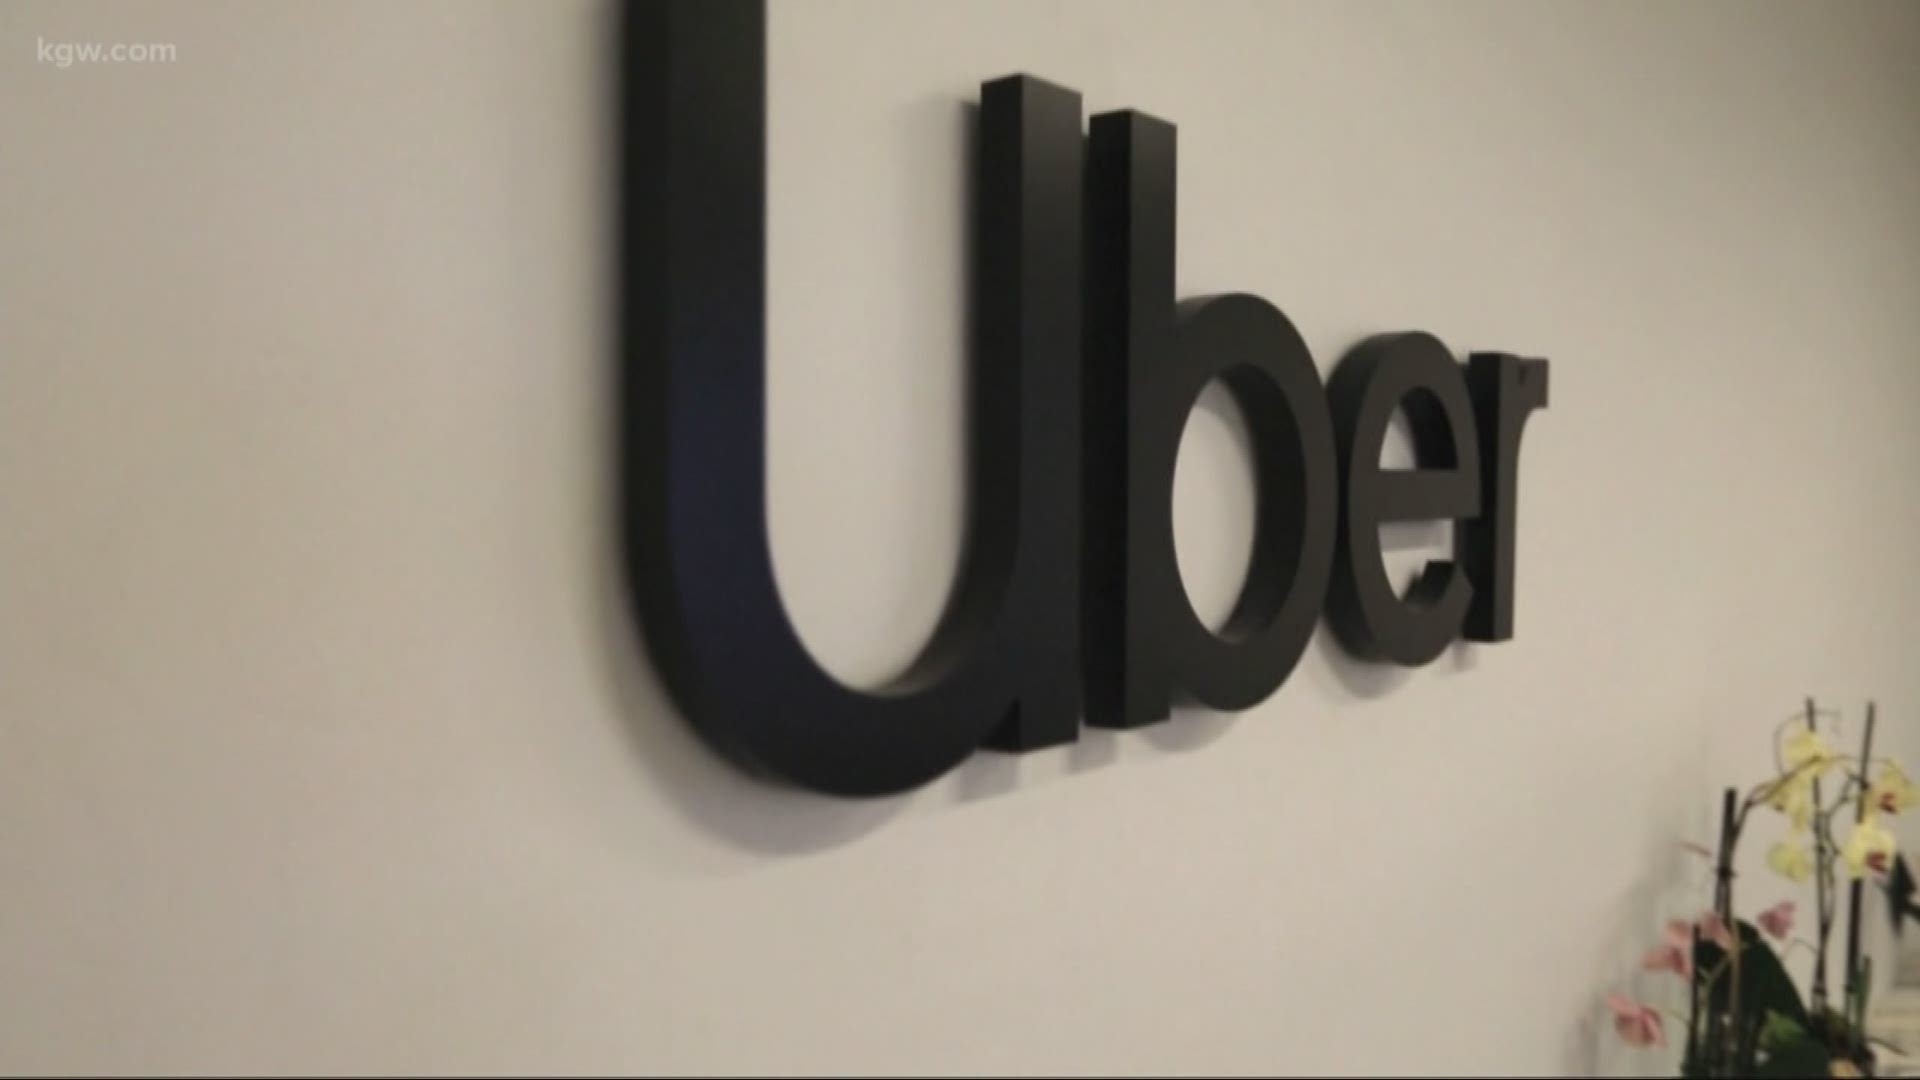 Local Uber drivers and passengers are sounding off on their experiences, after the company released a study on assaults and safety.